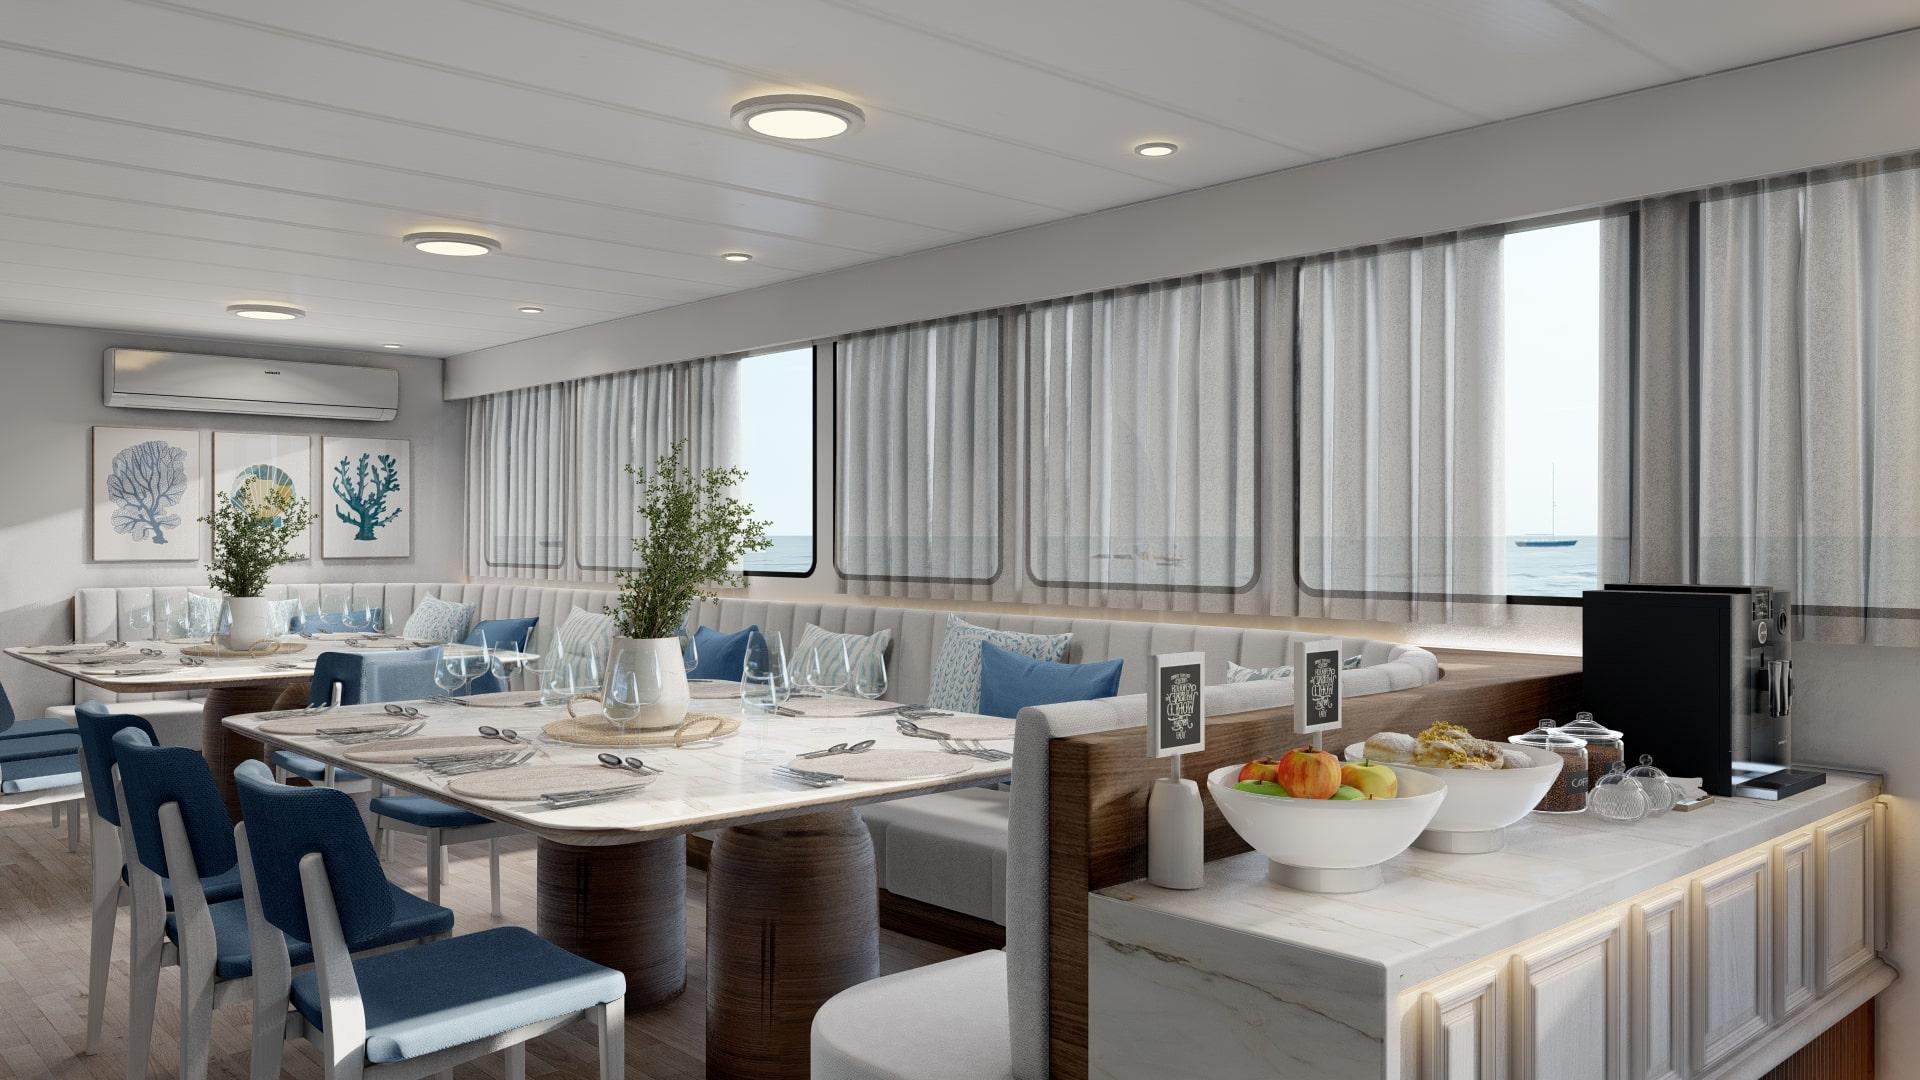 Galaxy Diver 2 cruise ship dining room